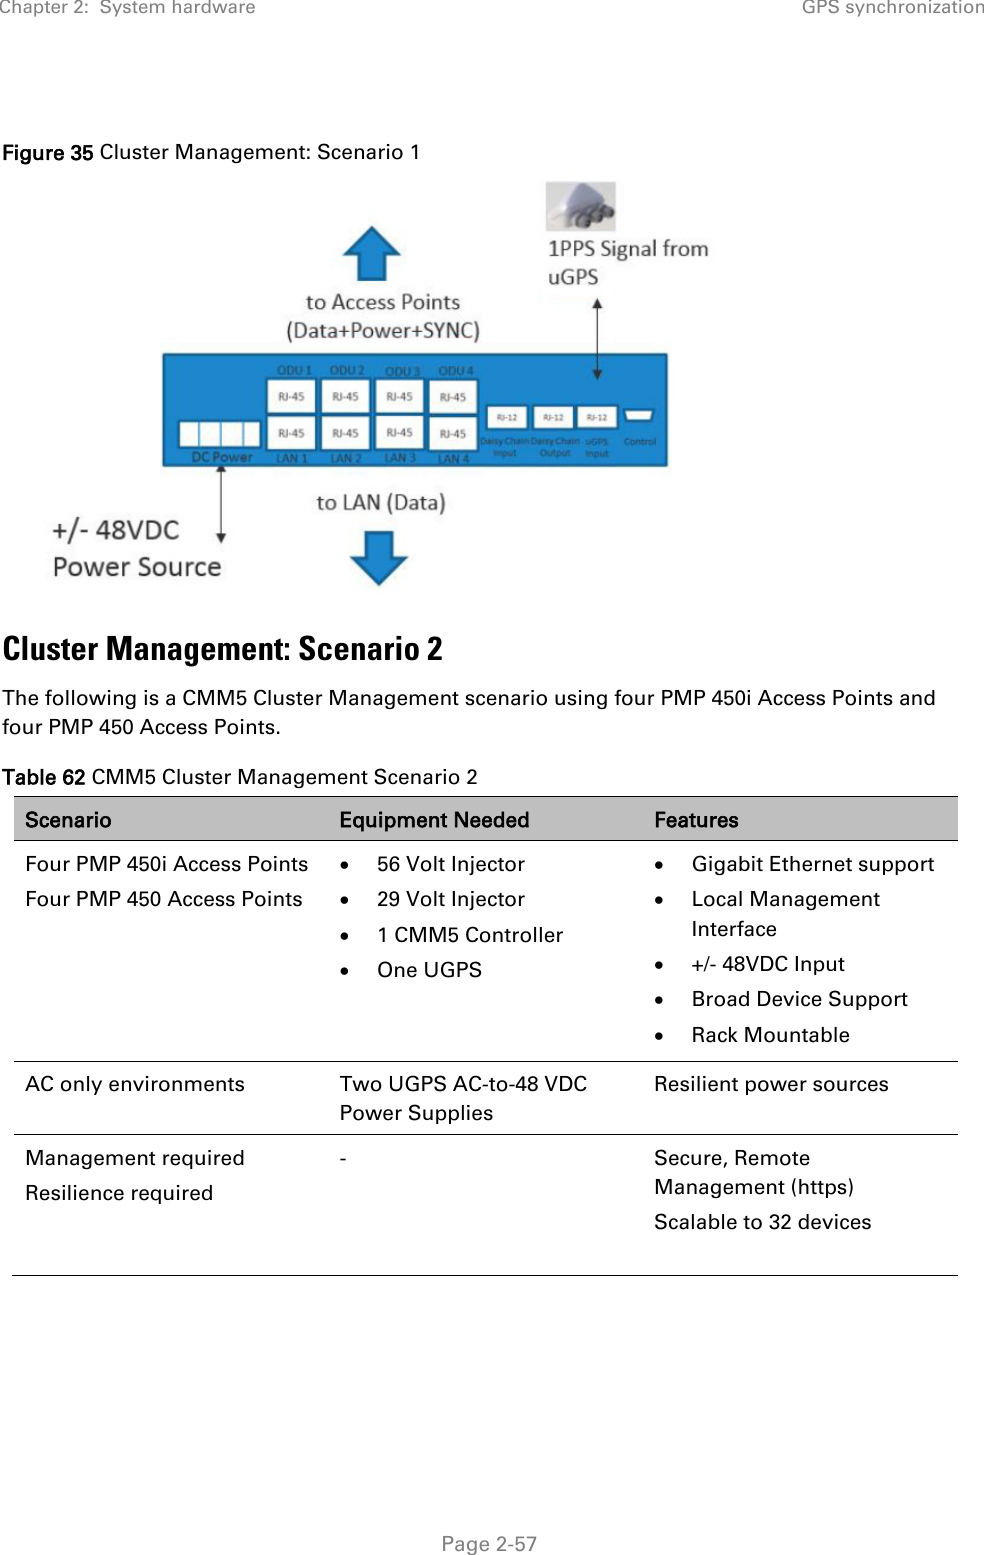 Chapter 2:  System hardware GPS synchronization   Page 2-57  Figure 35 Cluster Management: Scenario 1  Cluster Management: Scenario 2 The following is a CMM5 Cluster Management scenario using four PMP 450i Access Points and four PMP 450 Access Points. Table 62 CMM5 Cluster Management Scenario 2 Scenario Equipment Needed Features Four PMP 450i Access Points Four PMP 450 Access Points • 56 Volt Injector • 29 Volt Injector • 1 CMM5 Controller • One UGPS • Gigabit Ethernet support • Local Management Interface • +/- 48VDC Input • Broad Device Support • Rack Mountable AC only environments Two UGPS AC-to-48 VDC Power Supplies Resilient power sources Management required Resilience required -  Secure, Remote Management (https) Scalable to 32 devices    